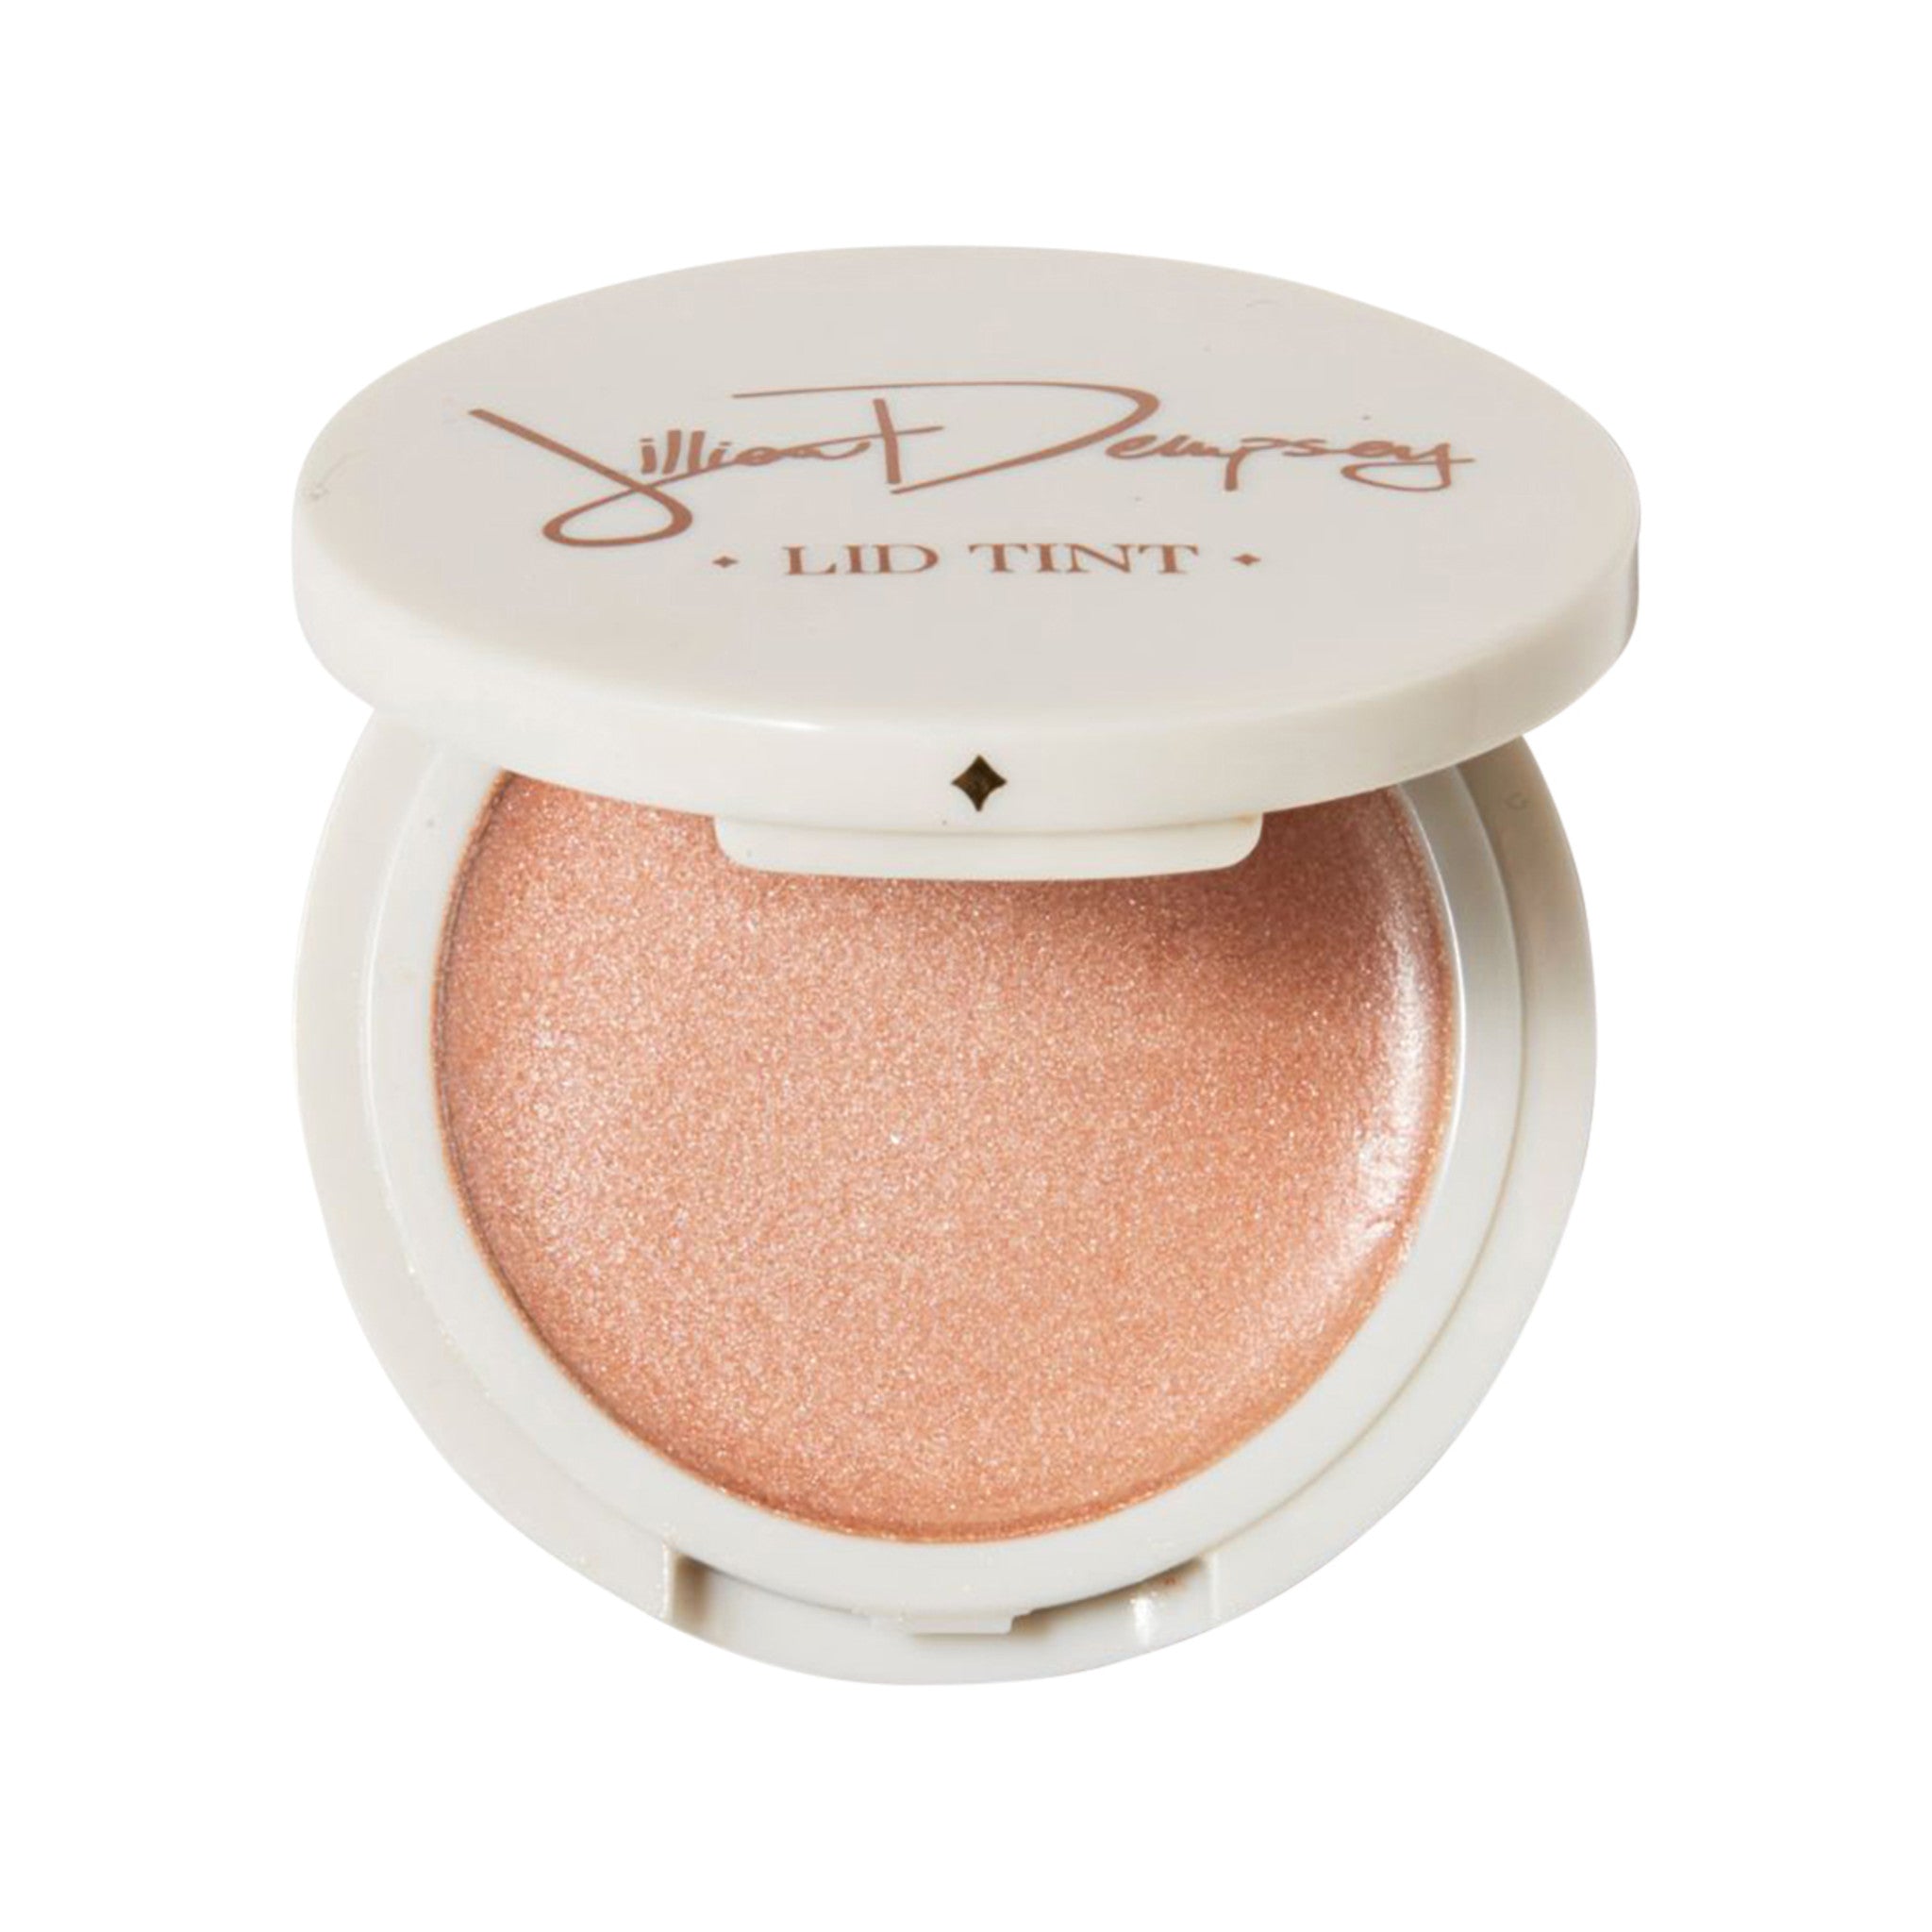 Jillian Dempsey Lid Tint Color/Shade variant: Shell main image. This product is in the color nude